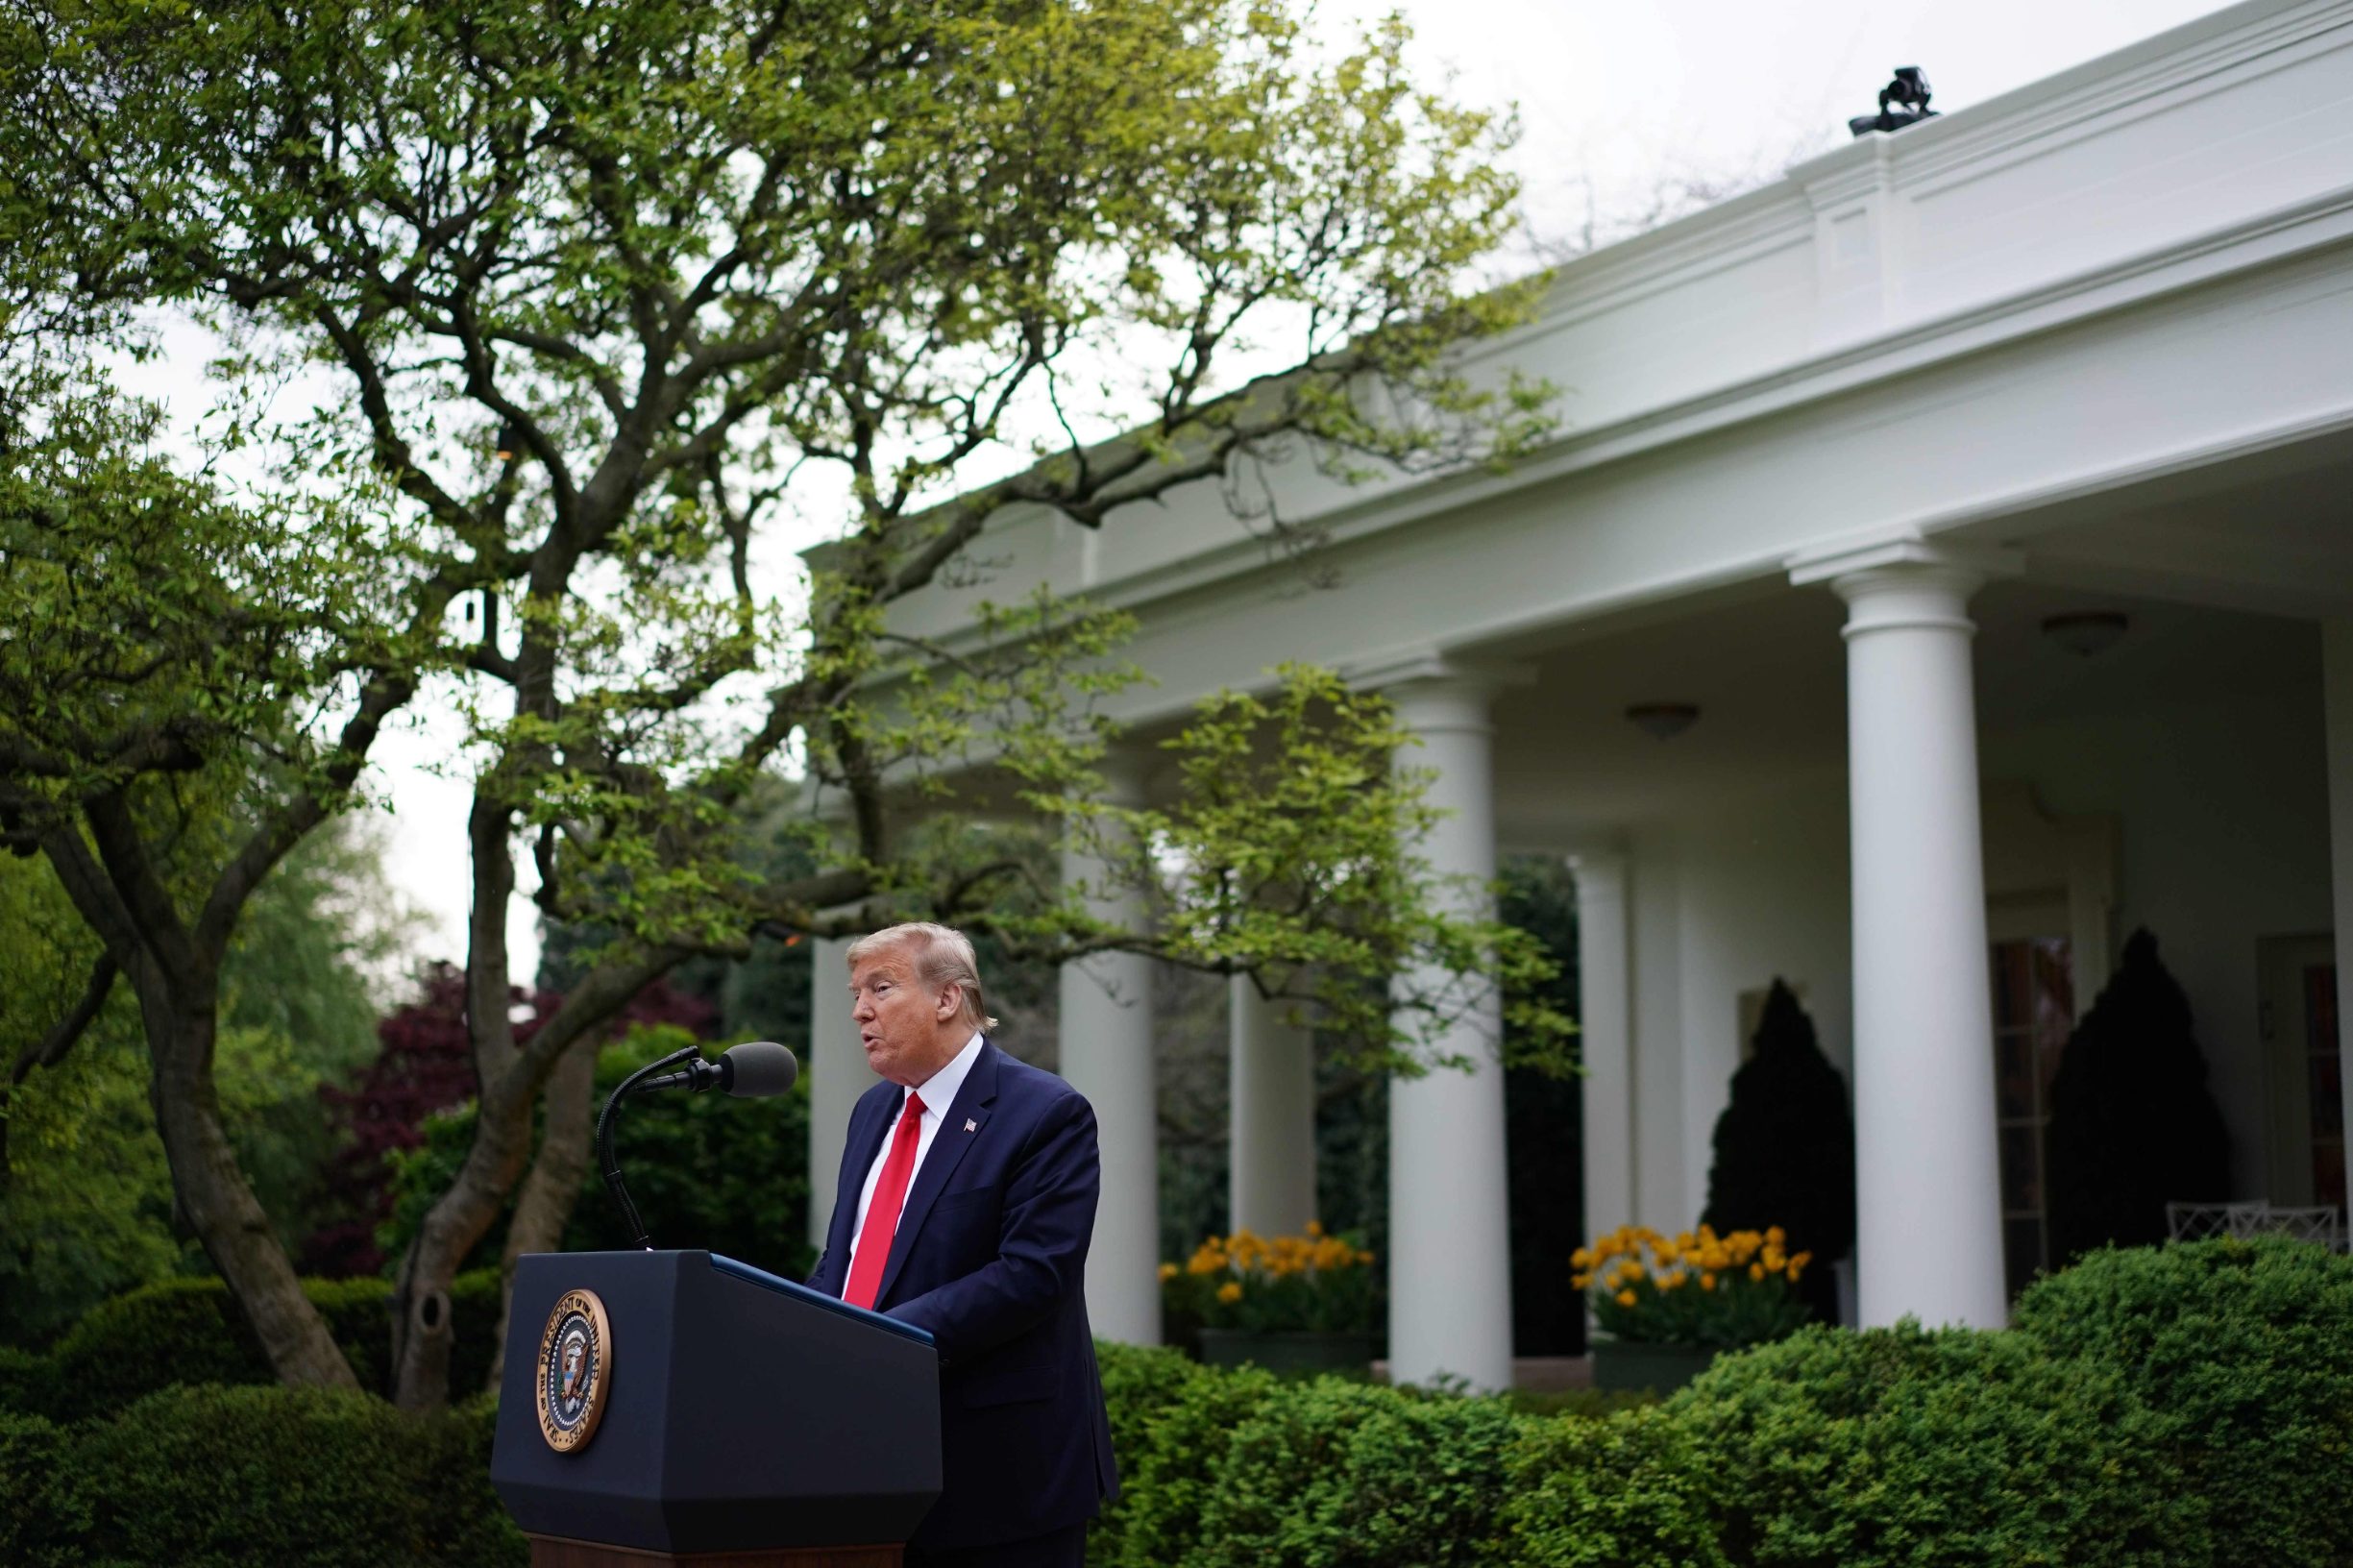 US President Donald Trump speaks during the daily briefing on the novel coronavirus, which causes COVID-19, in the Rose Garden of the White House on April 14, 2020, in Washington, DC. (Photo by MANDEL NGAN / AFP)